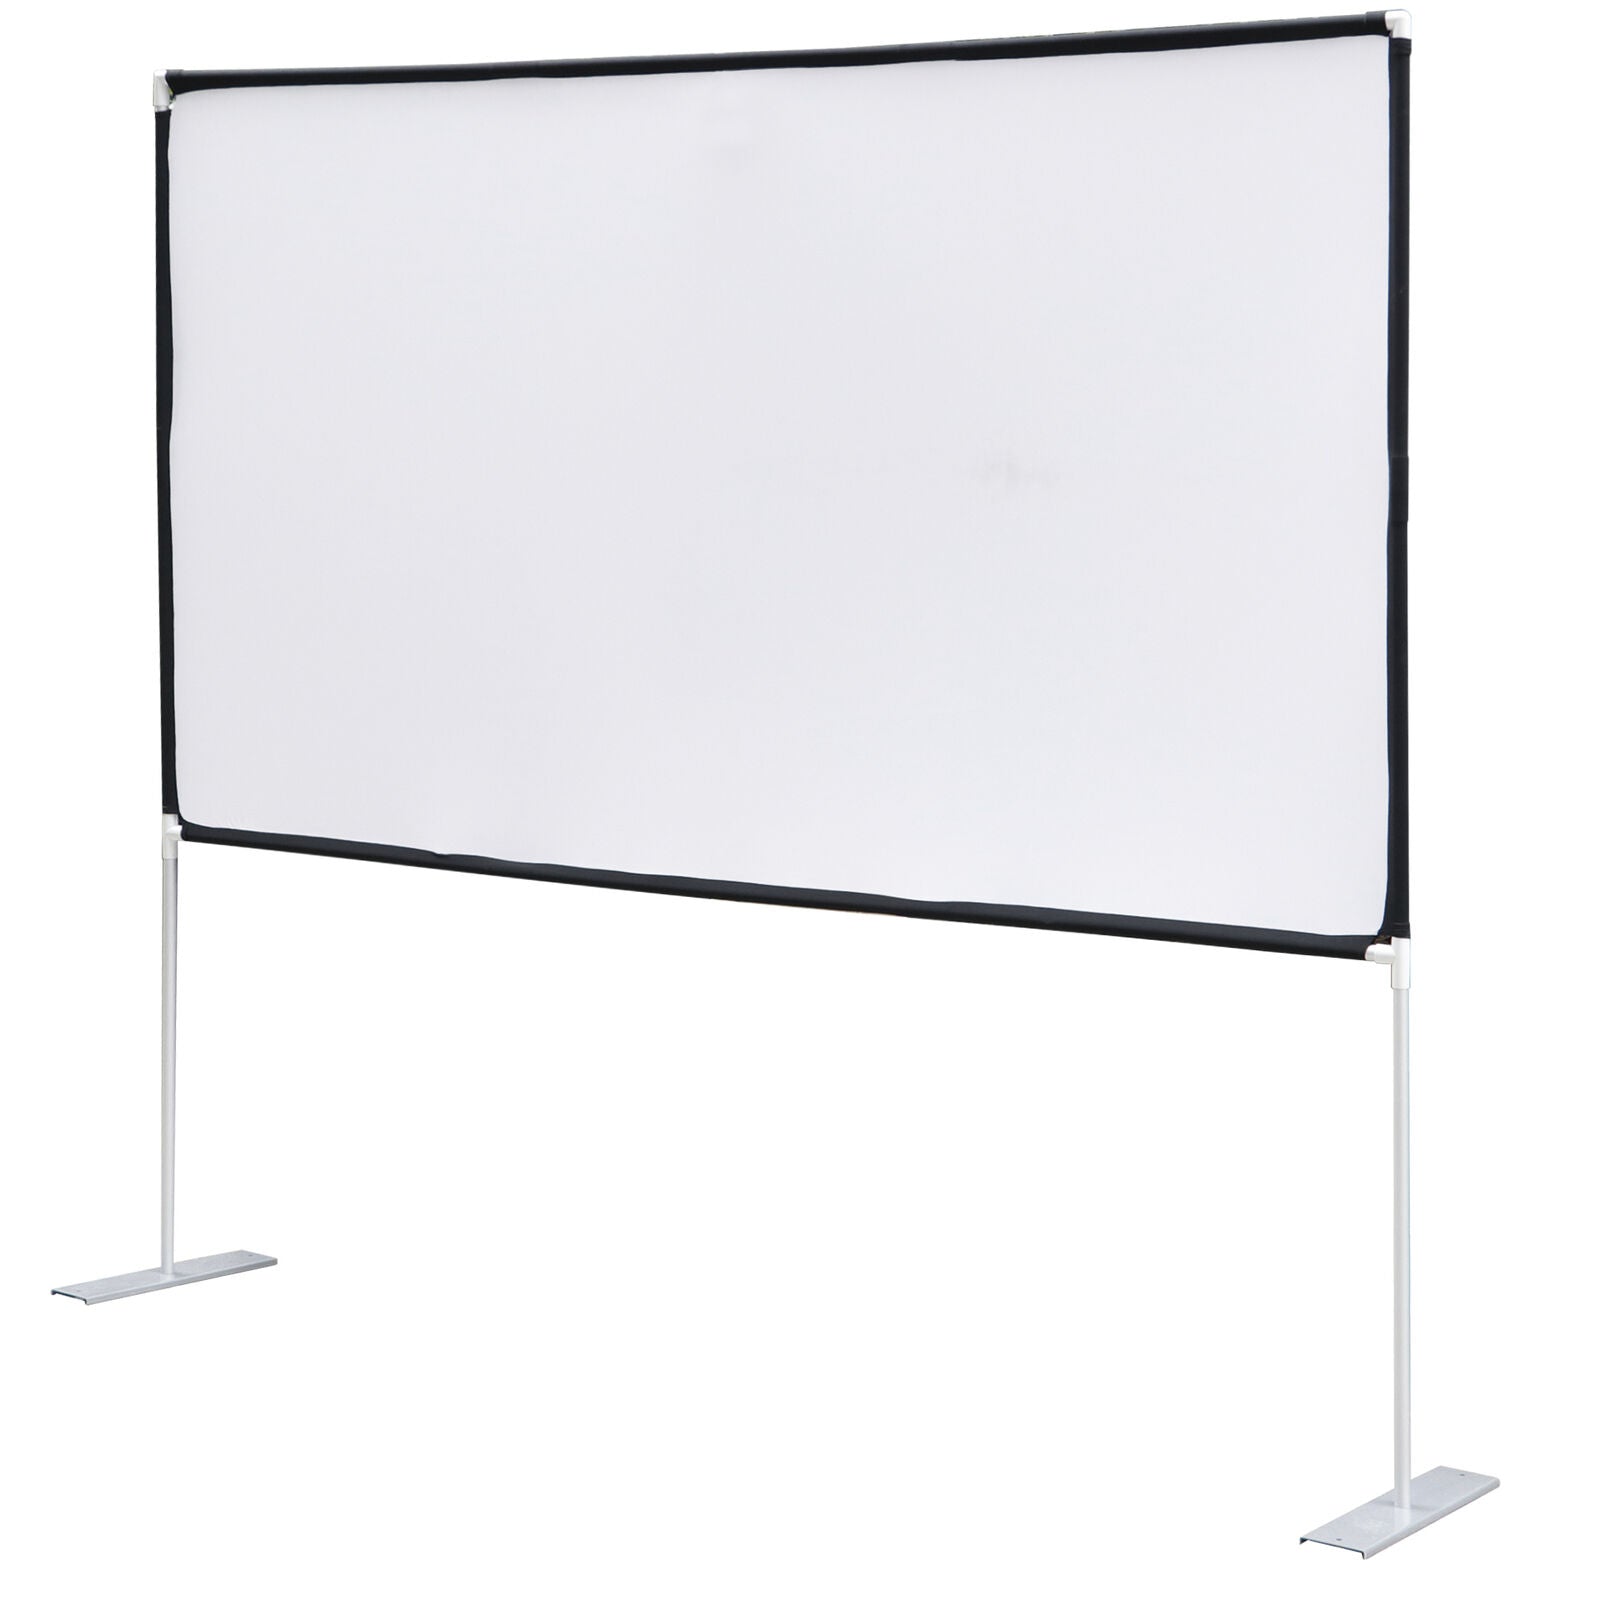 Projector Screen with Stand 100 inch Portable Projection Screen 16:9 4K Theater